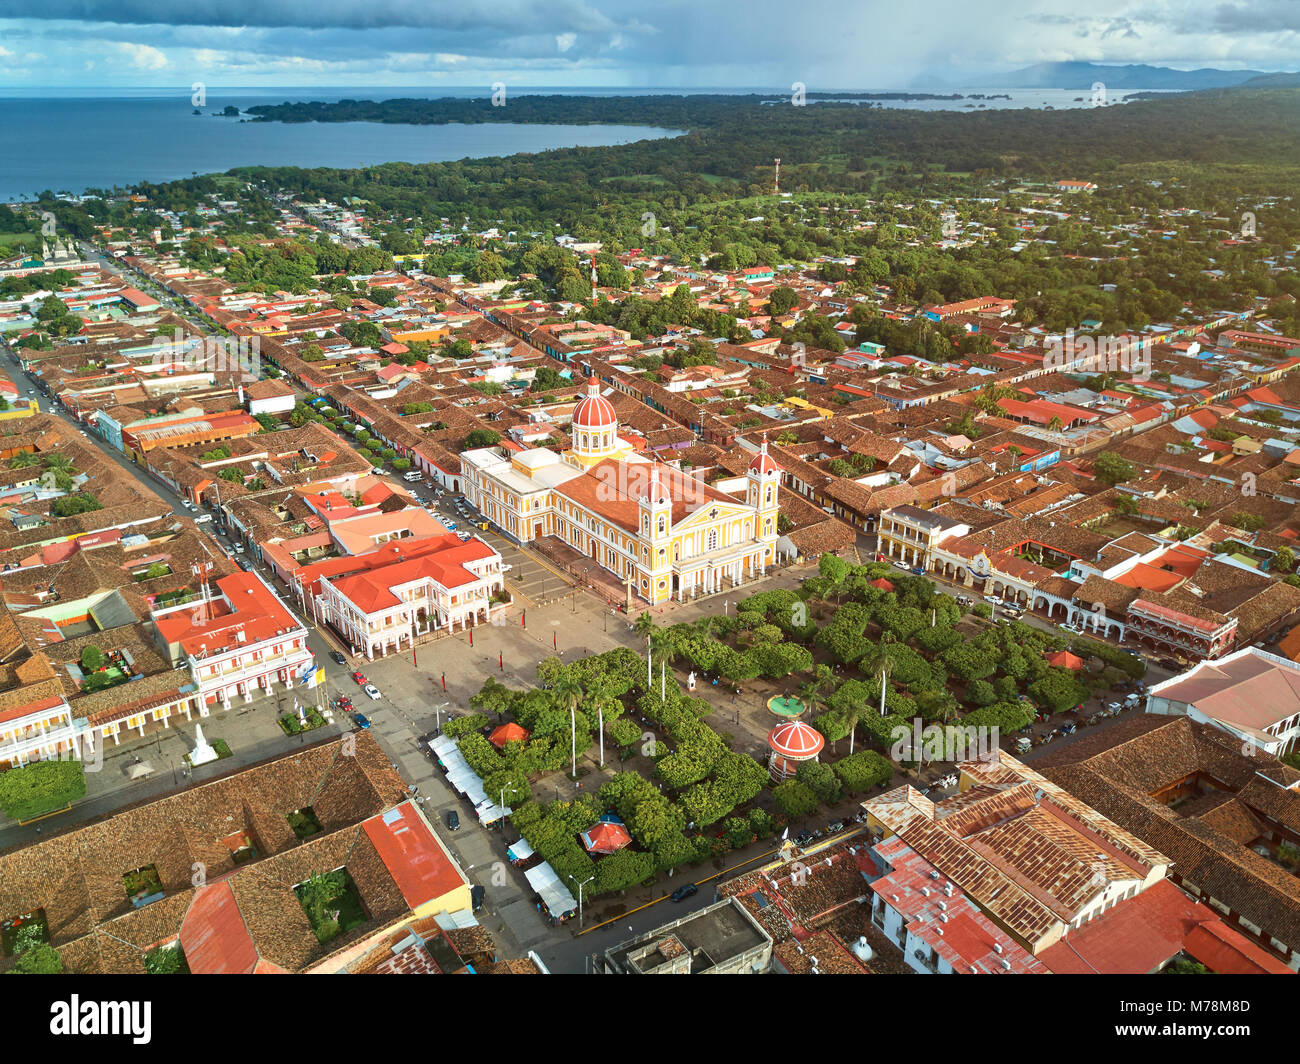 View from sky on Granada city. Aerial cityscape of tourist town in Nicaragua Stock Photo